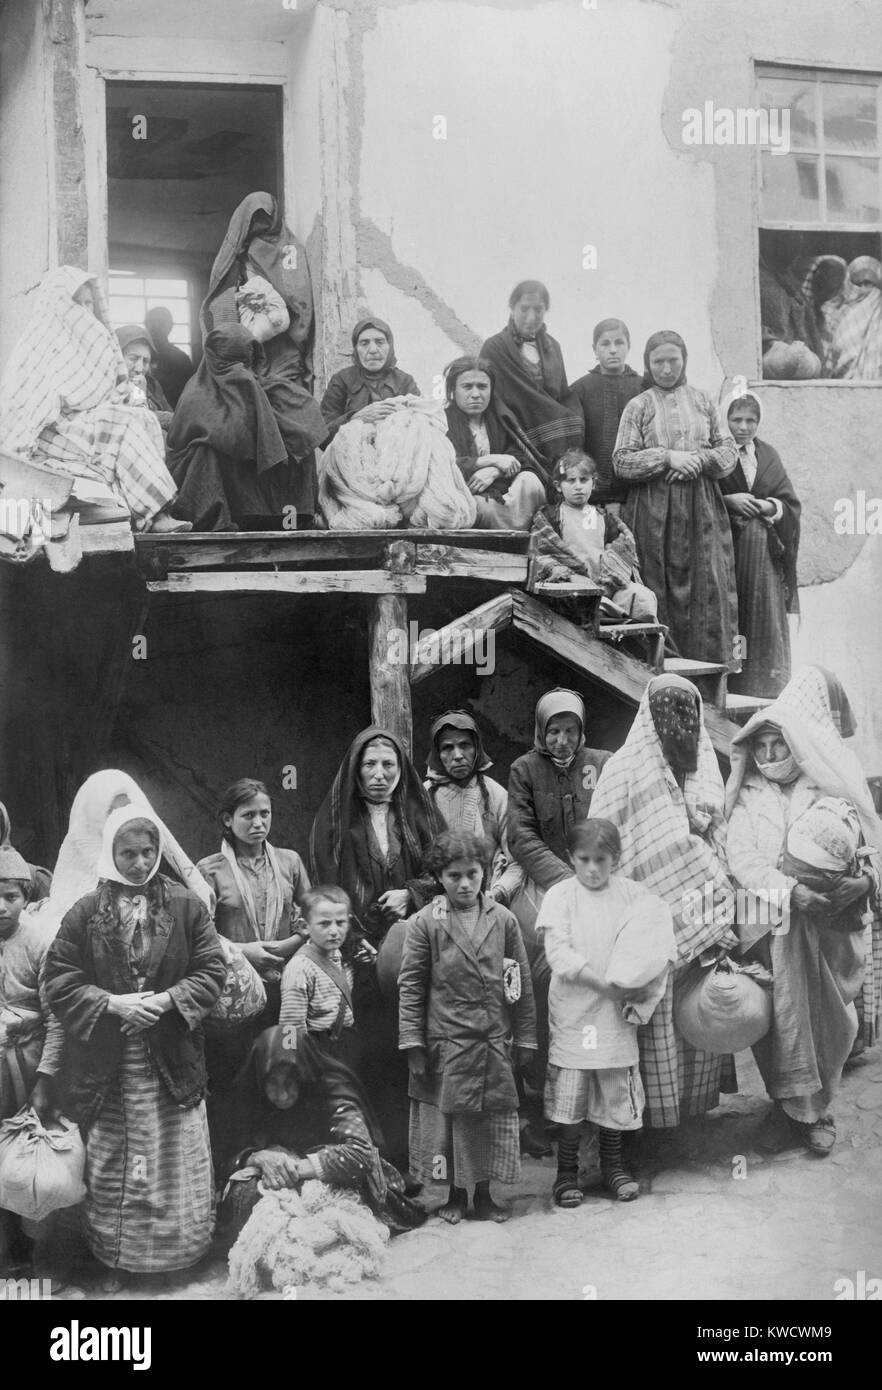 Armenian and possibly Turkish women with children, waiting for work at Marsavan (Merzifon), Turkey. May 1919. The refugees received wool to weave into cloth and clothing for orphans. The women with their faces covered may be Armenian converts to Islam (BSLOC 2017 1 164) Stock Photo